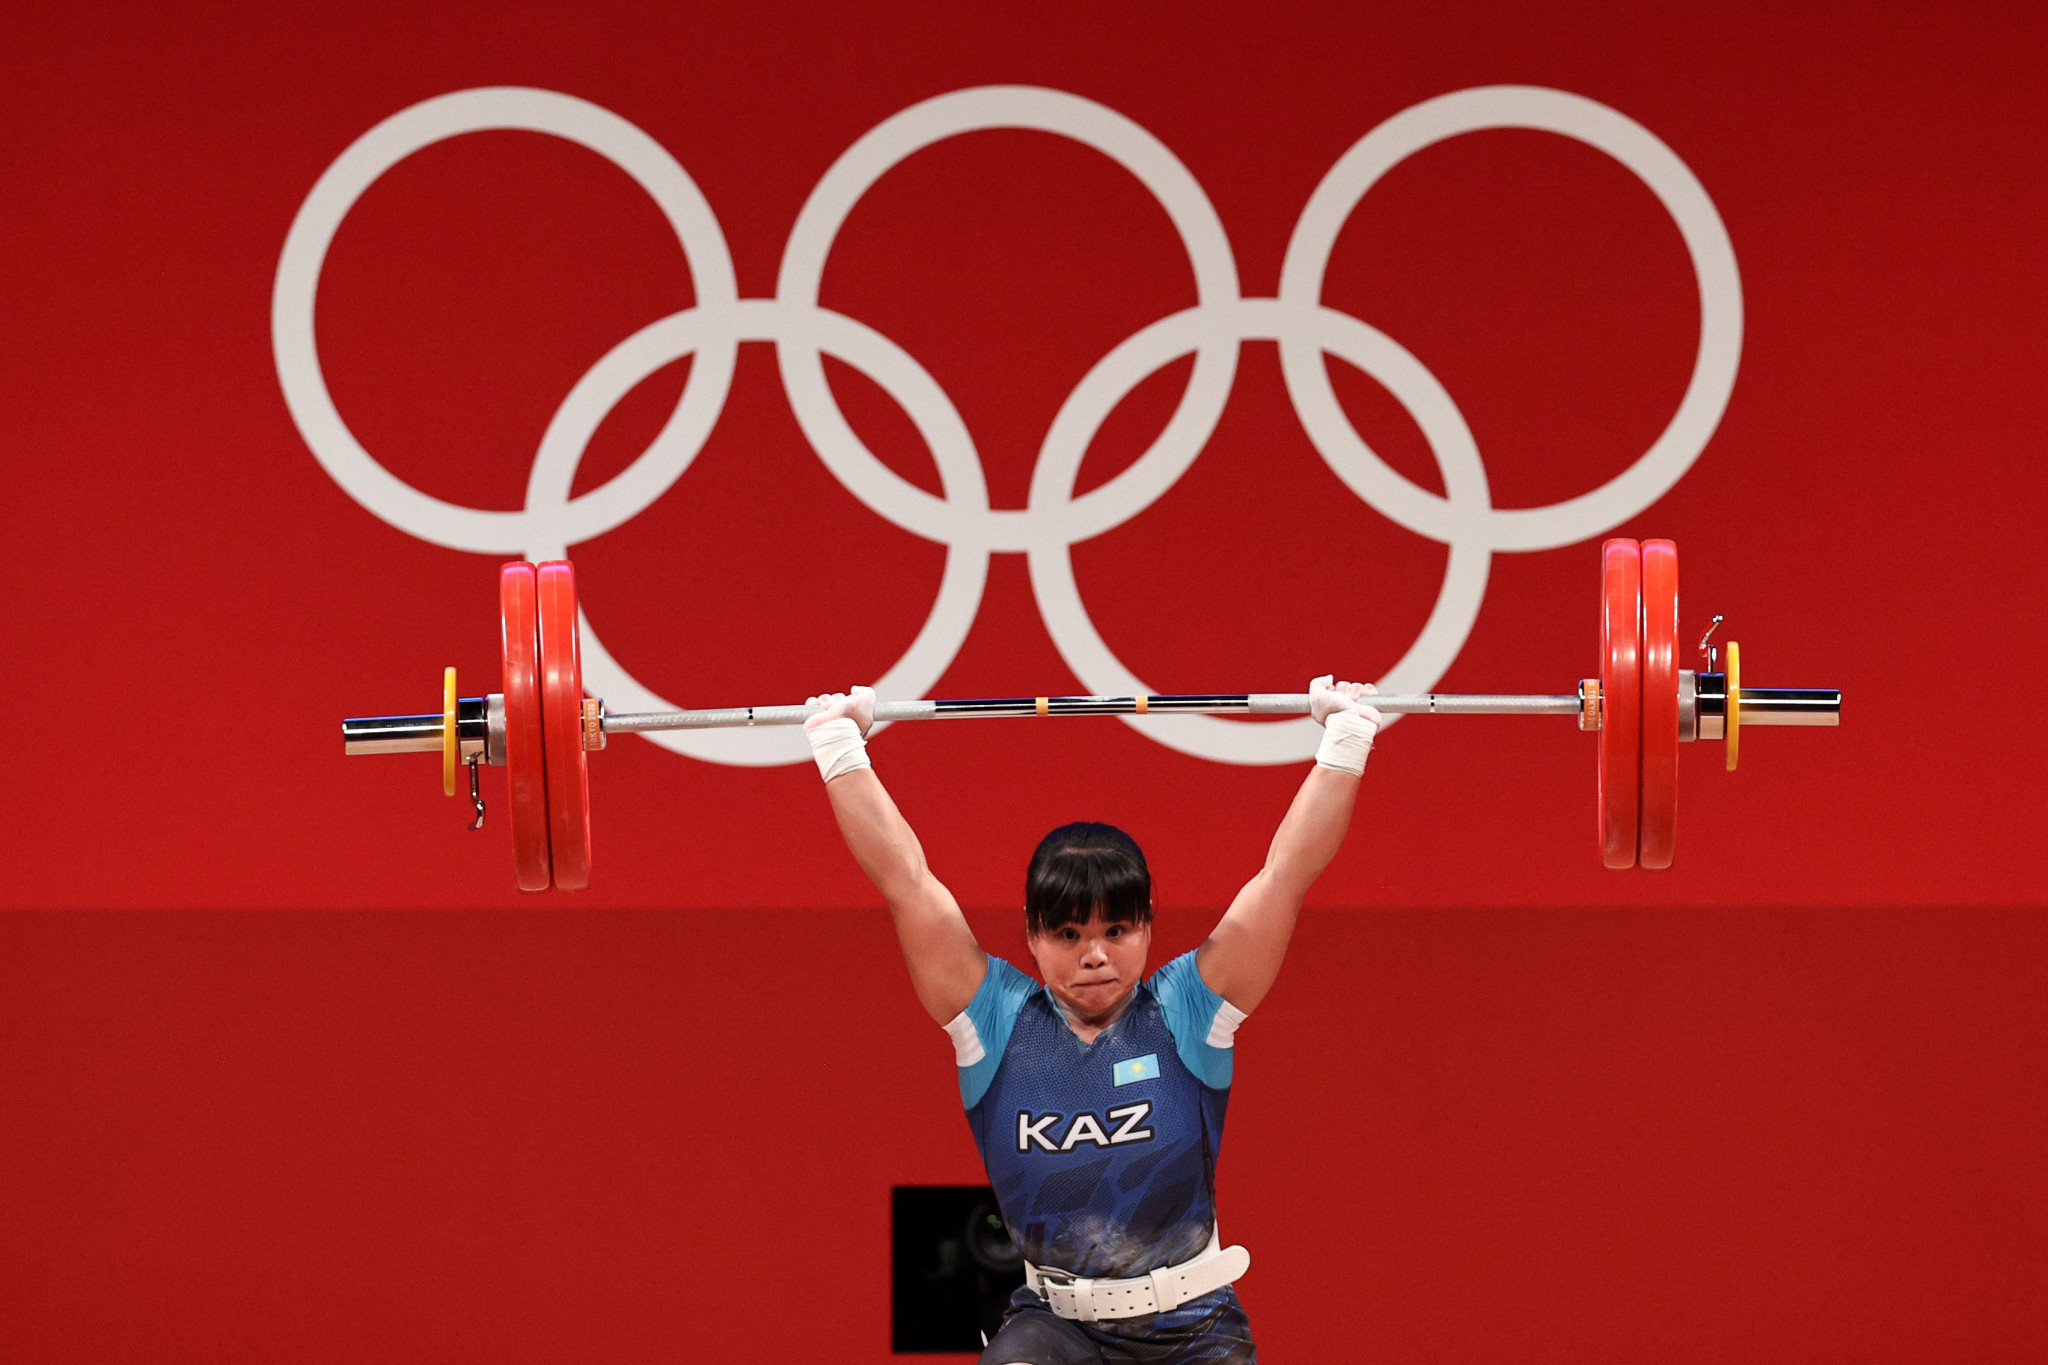 Zulfiya Chinshanlo also claimed weightlifting bronze for Kazakhstan at Tokyo 2020, having returned from her own doping suspension  ©Getty Images